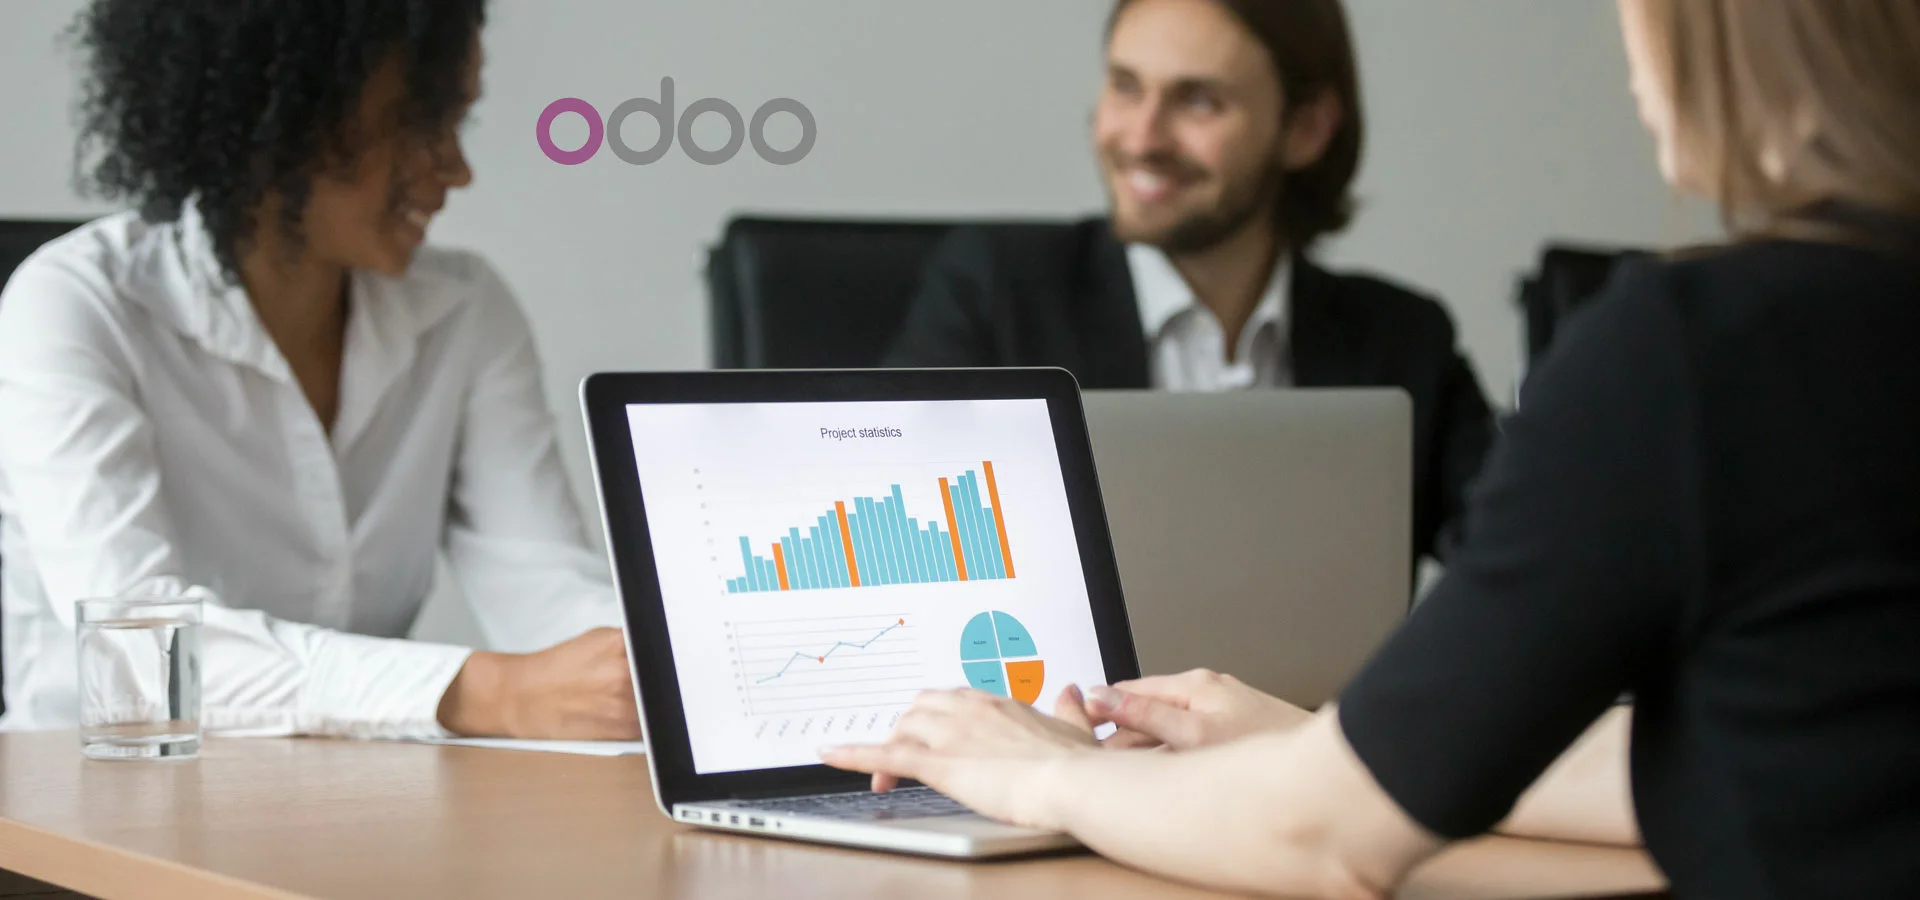 odoo-erp-support-and-services-related-blog-96